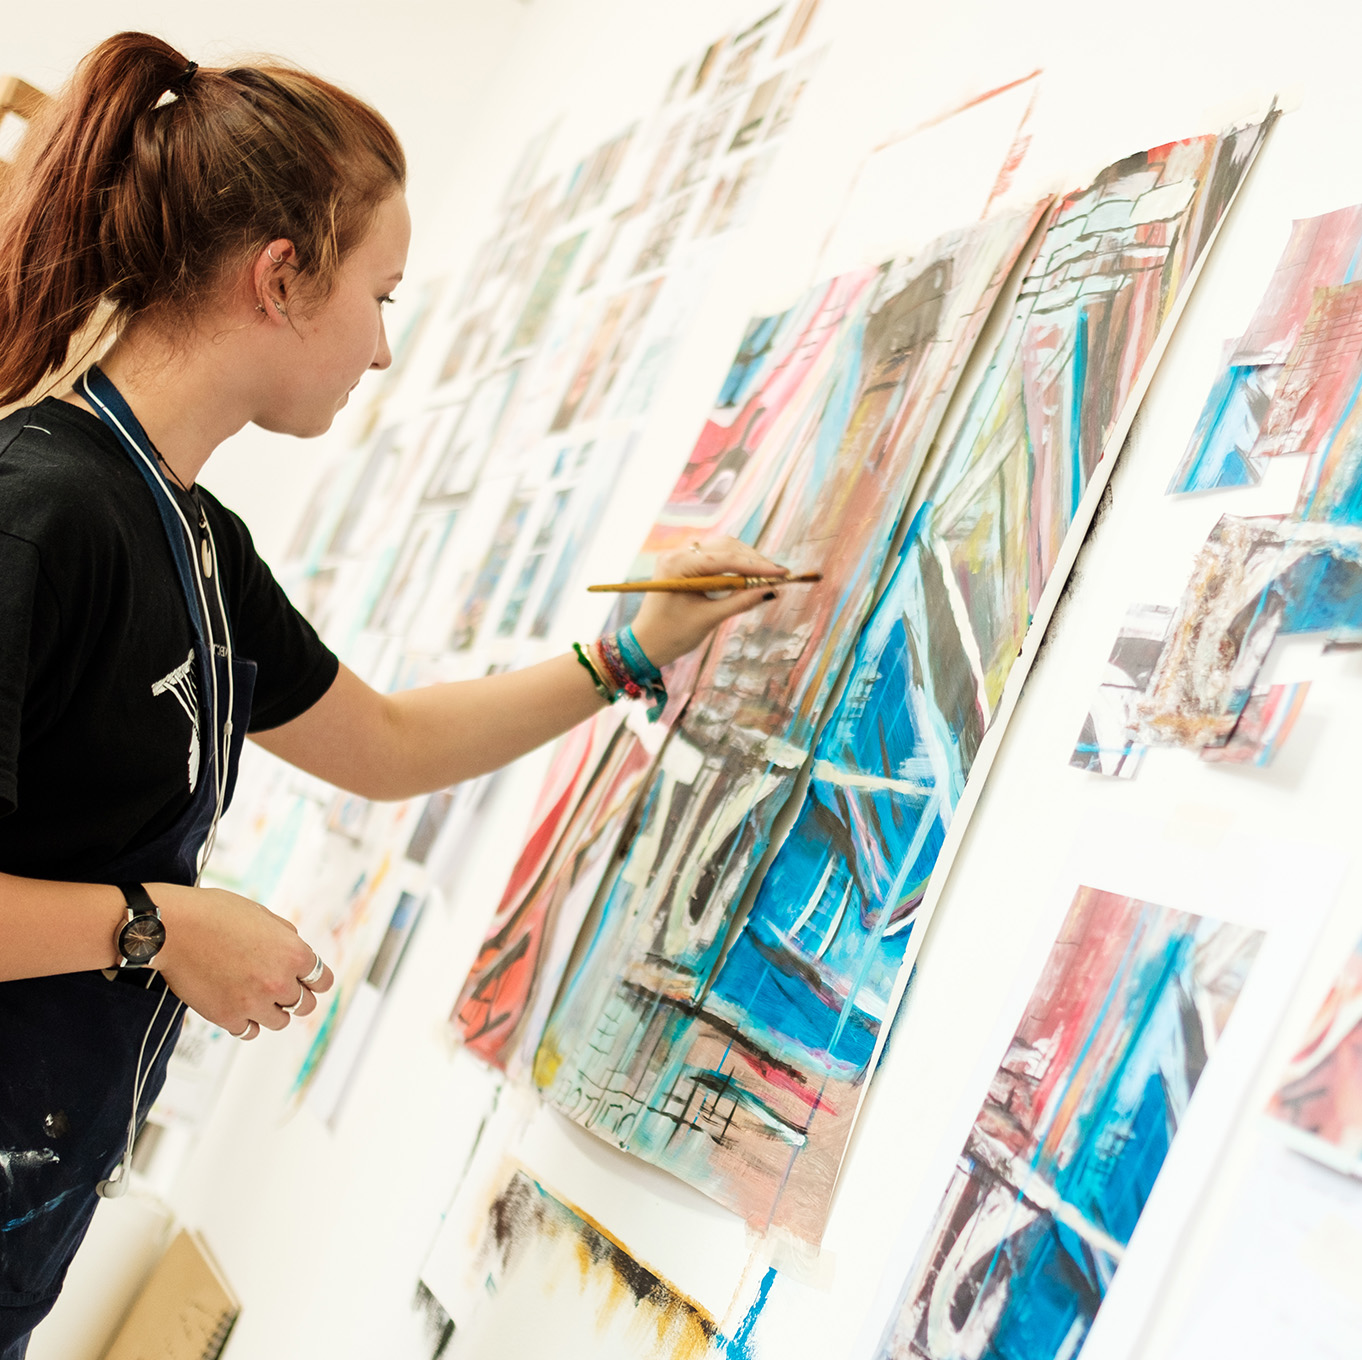 A fine art student paints the finishing touches onto her work